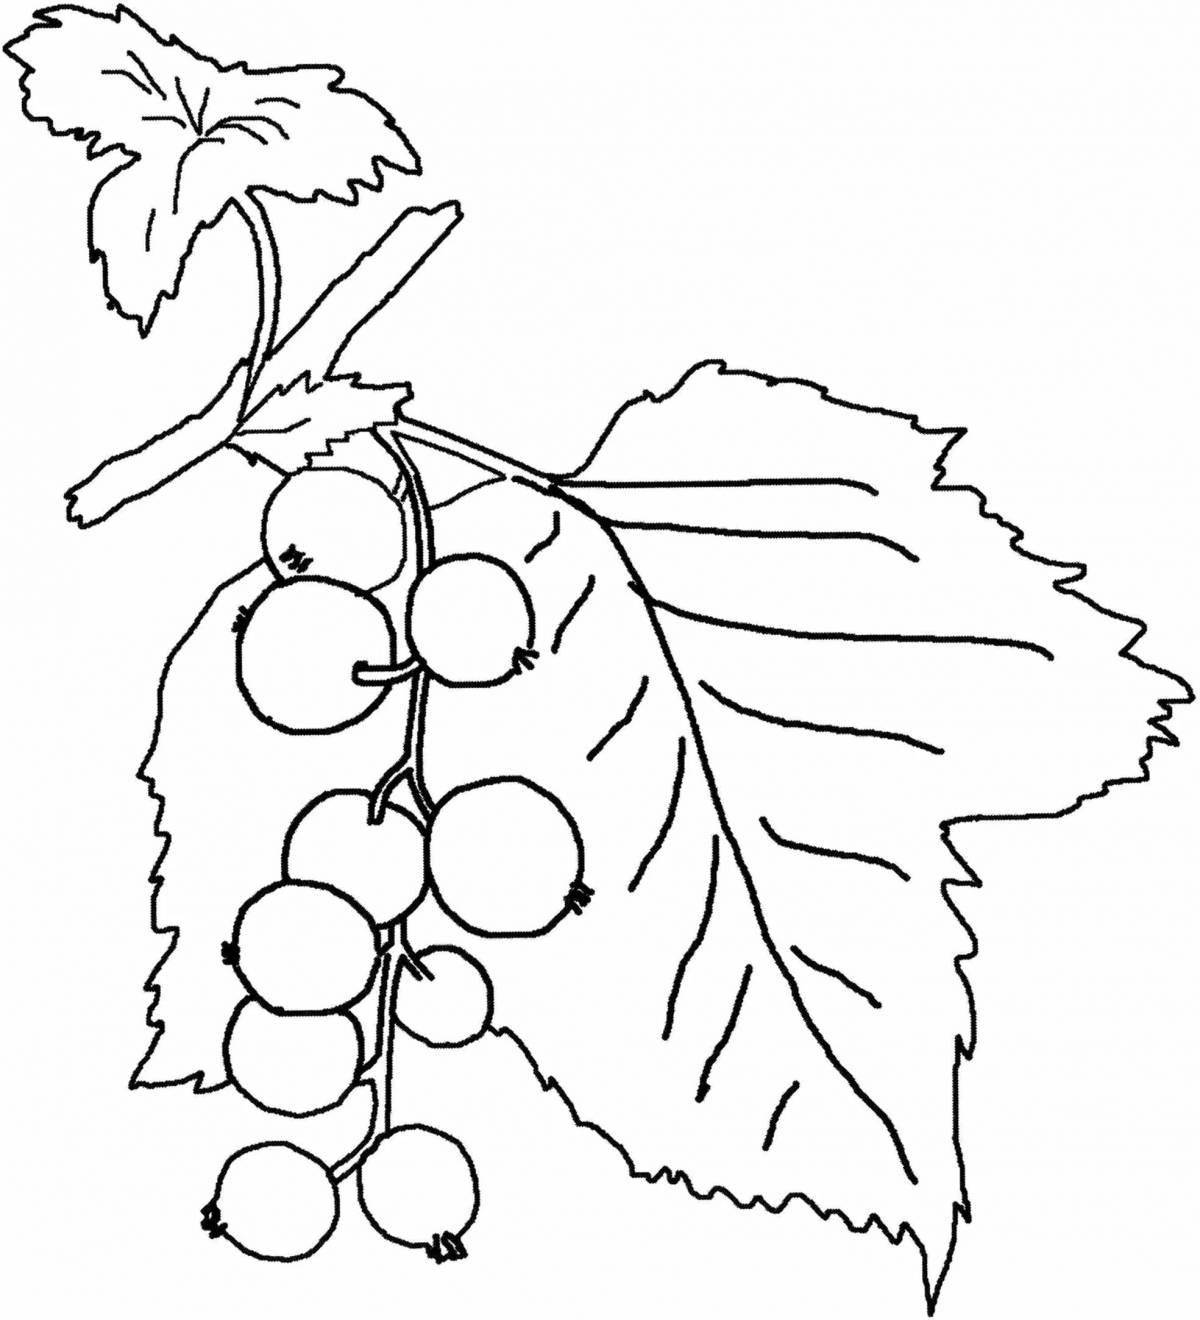 Fun coloring page how to draw a coloring book